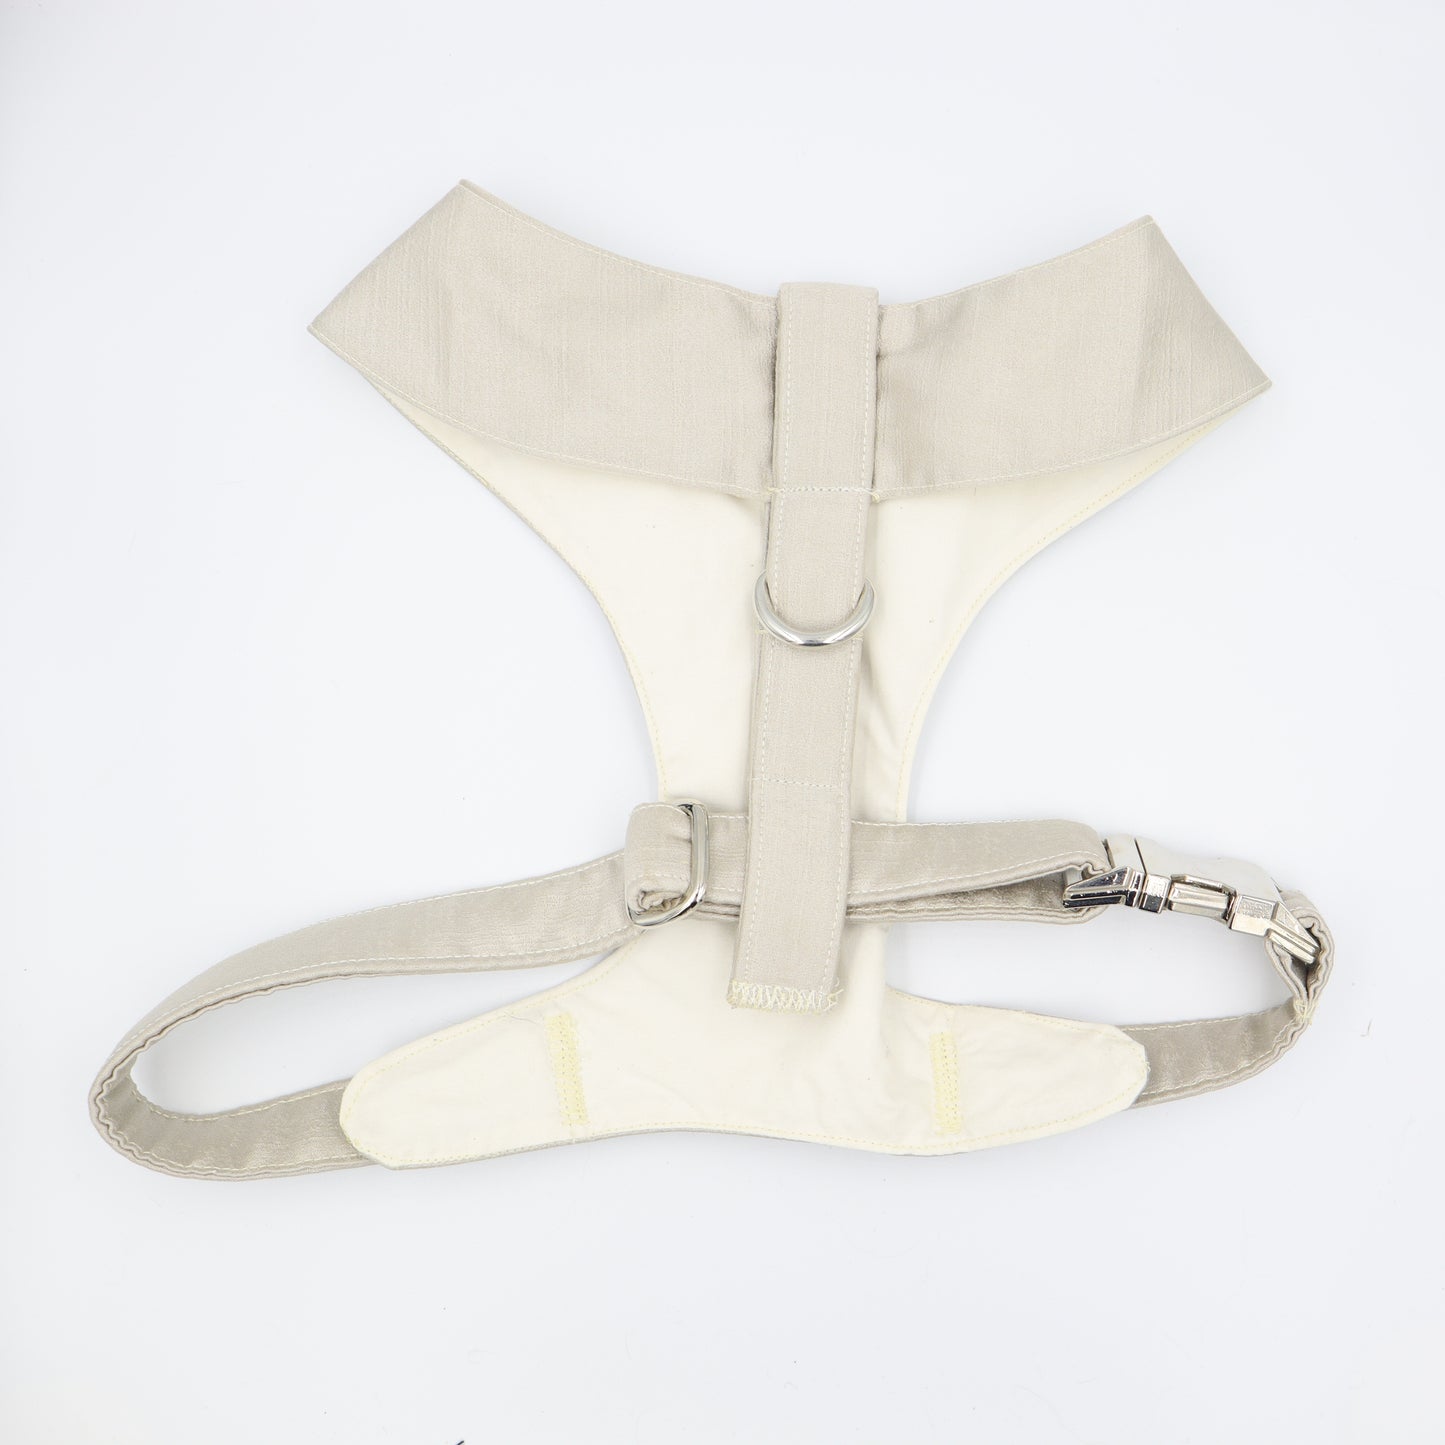 Tuxedo Wedding Dog Harness in Beige Natural Shot Silk Satin with Emerald Green Bow CHOICE of COLOURS